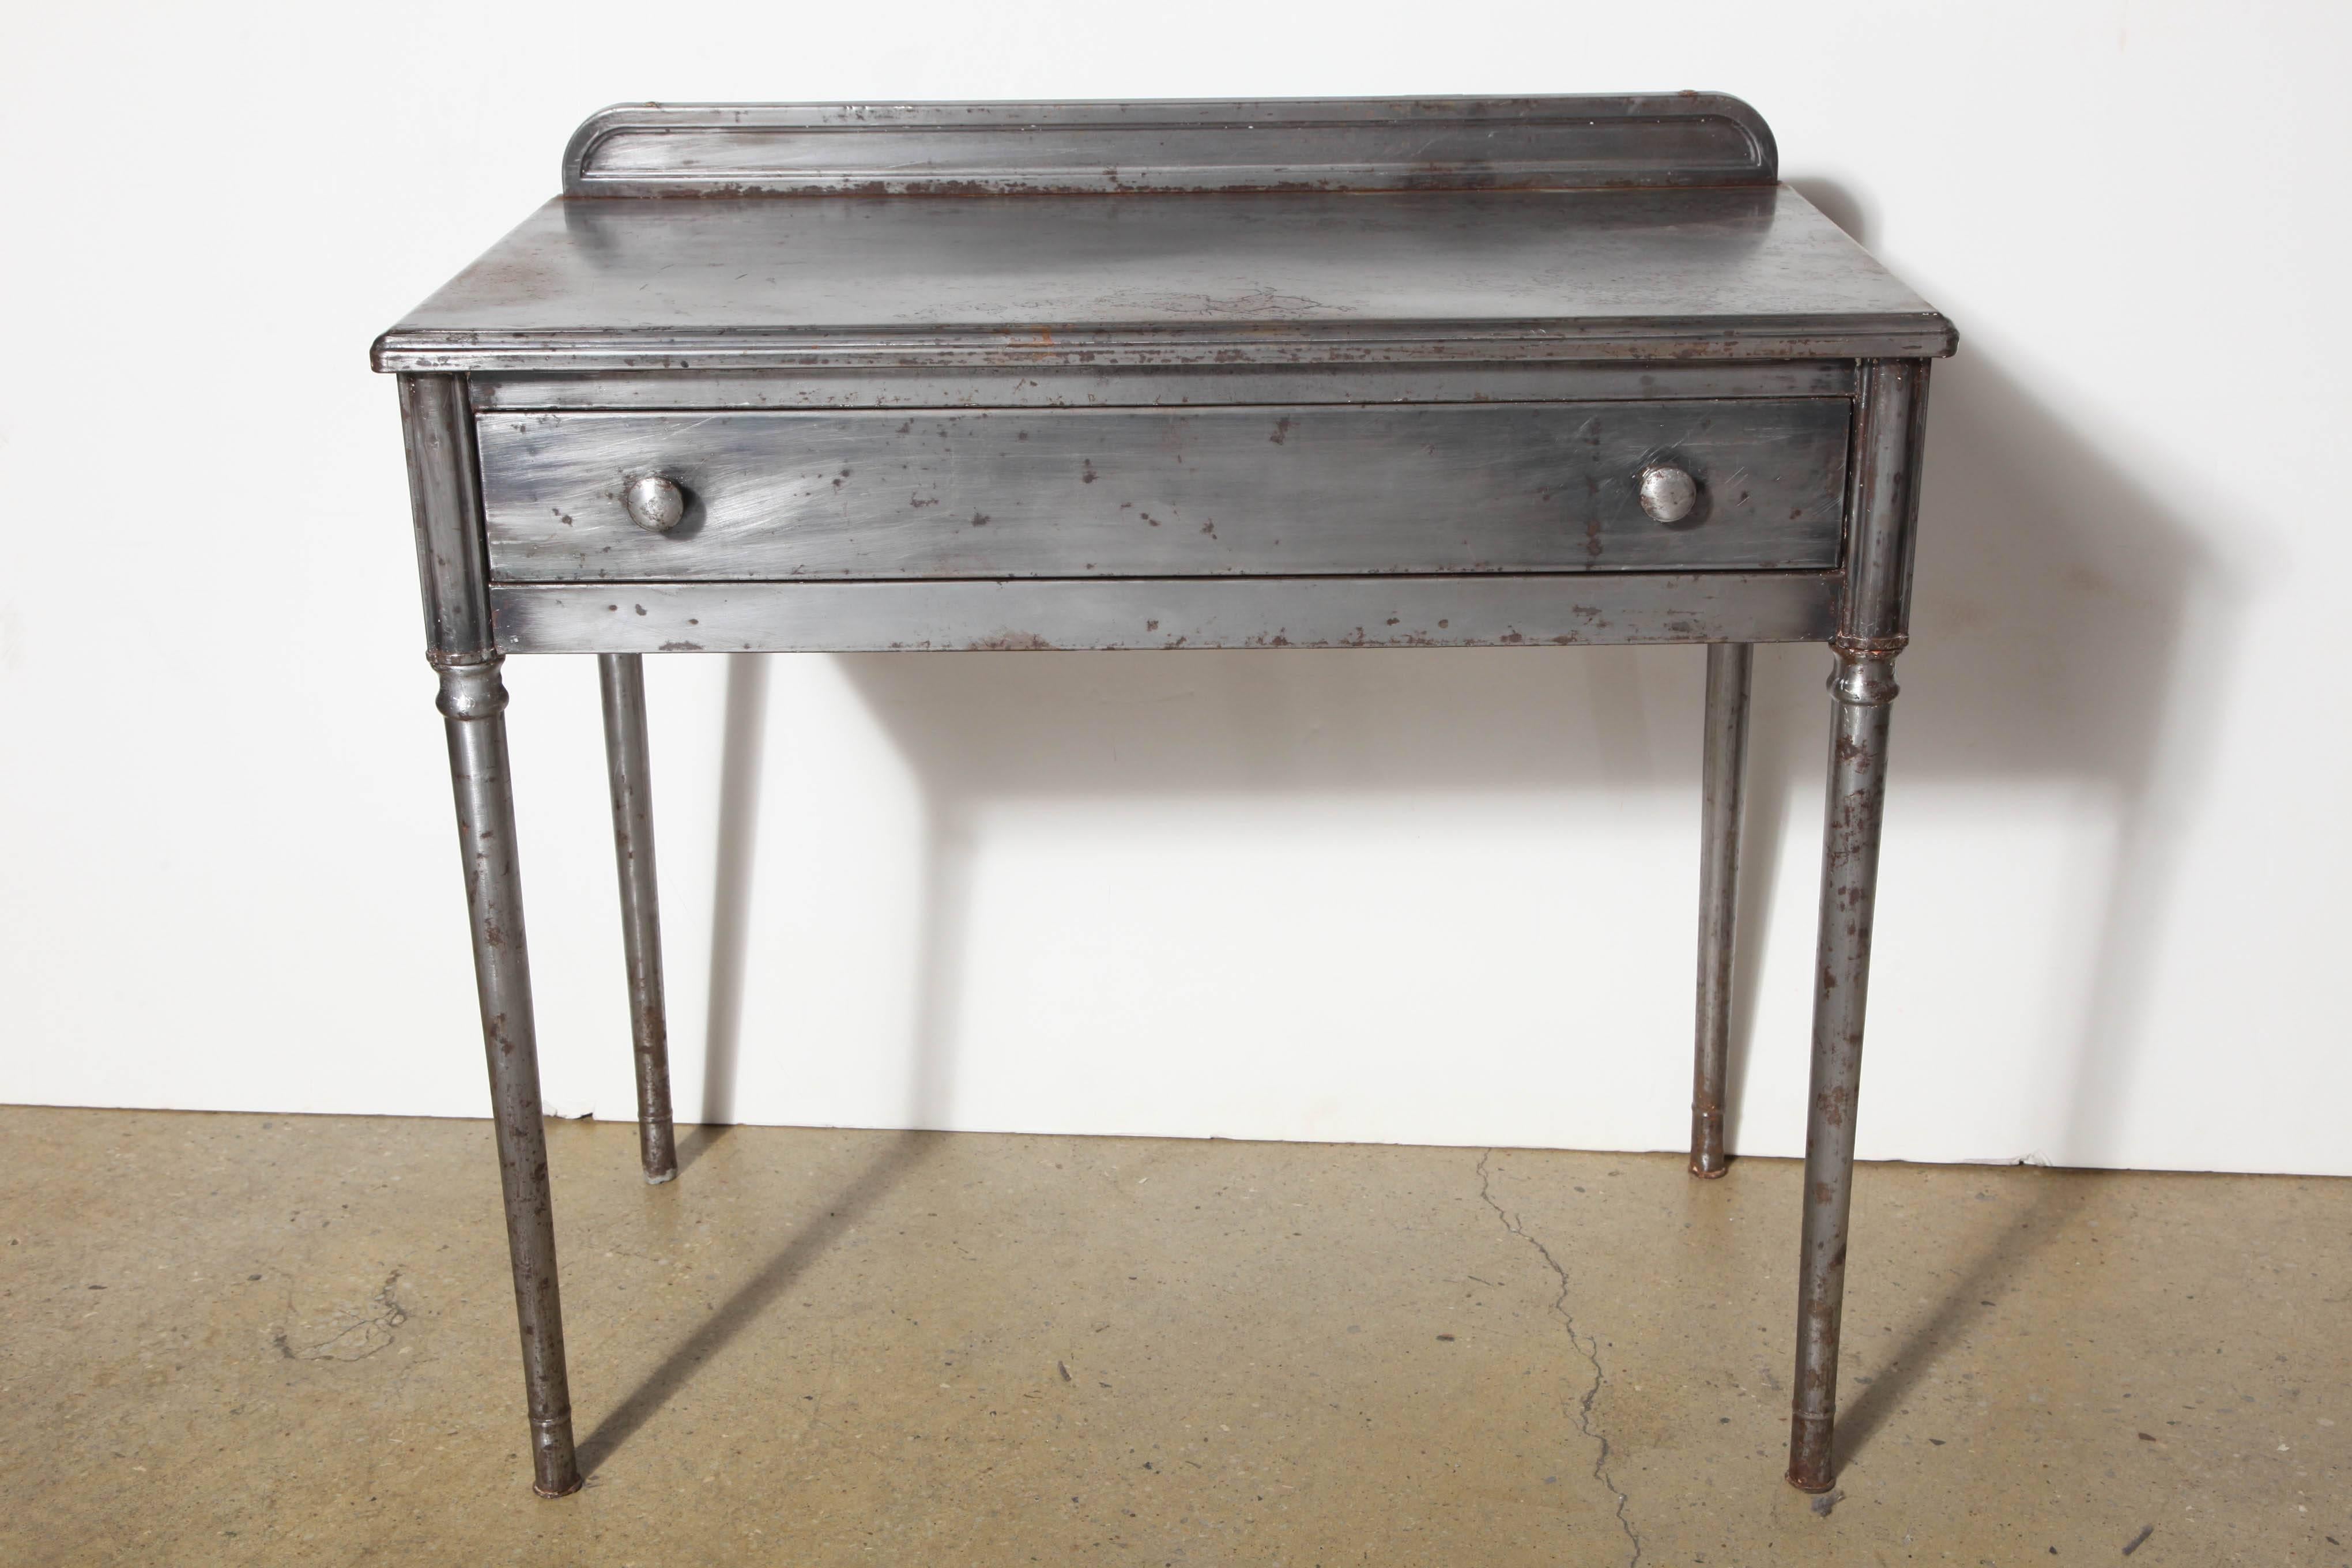 early 20th century Edwardian Industrial Steel Vanity or Edwardian Desk.  
With large drawer. Old vintage distressed metal.  Paint removed, sealed